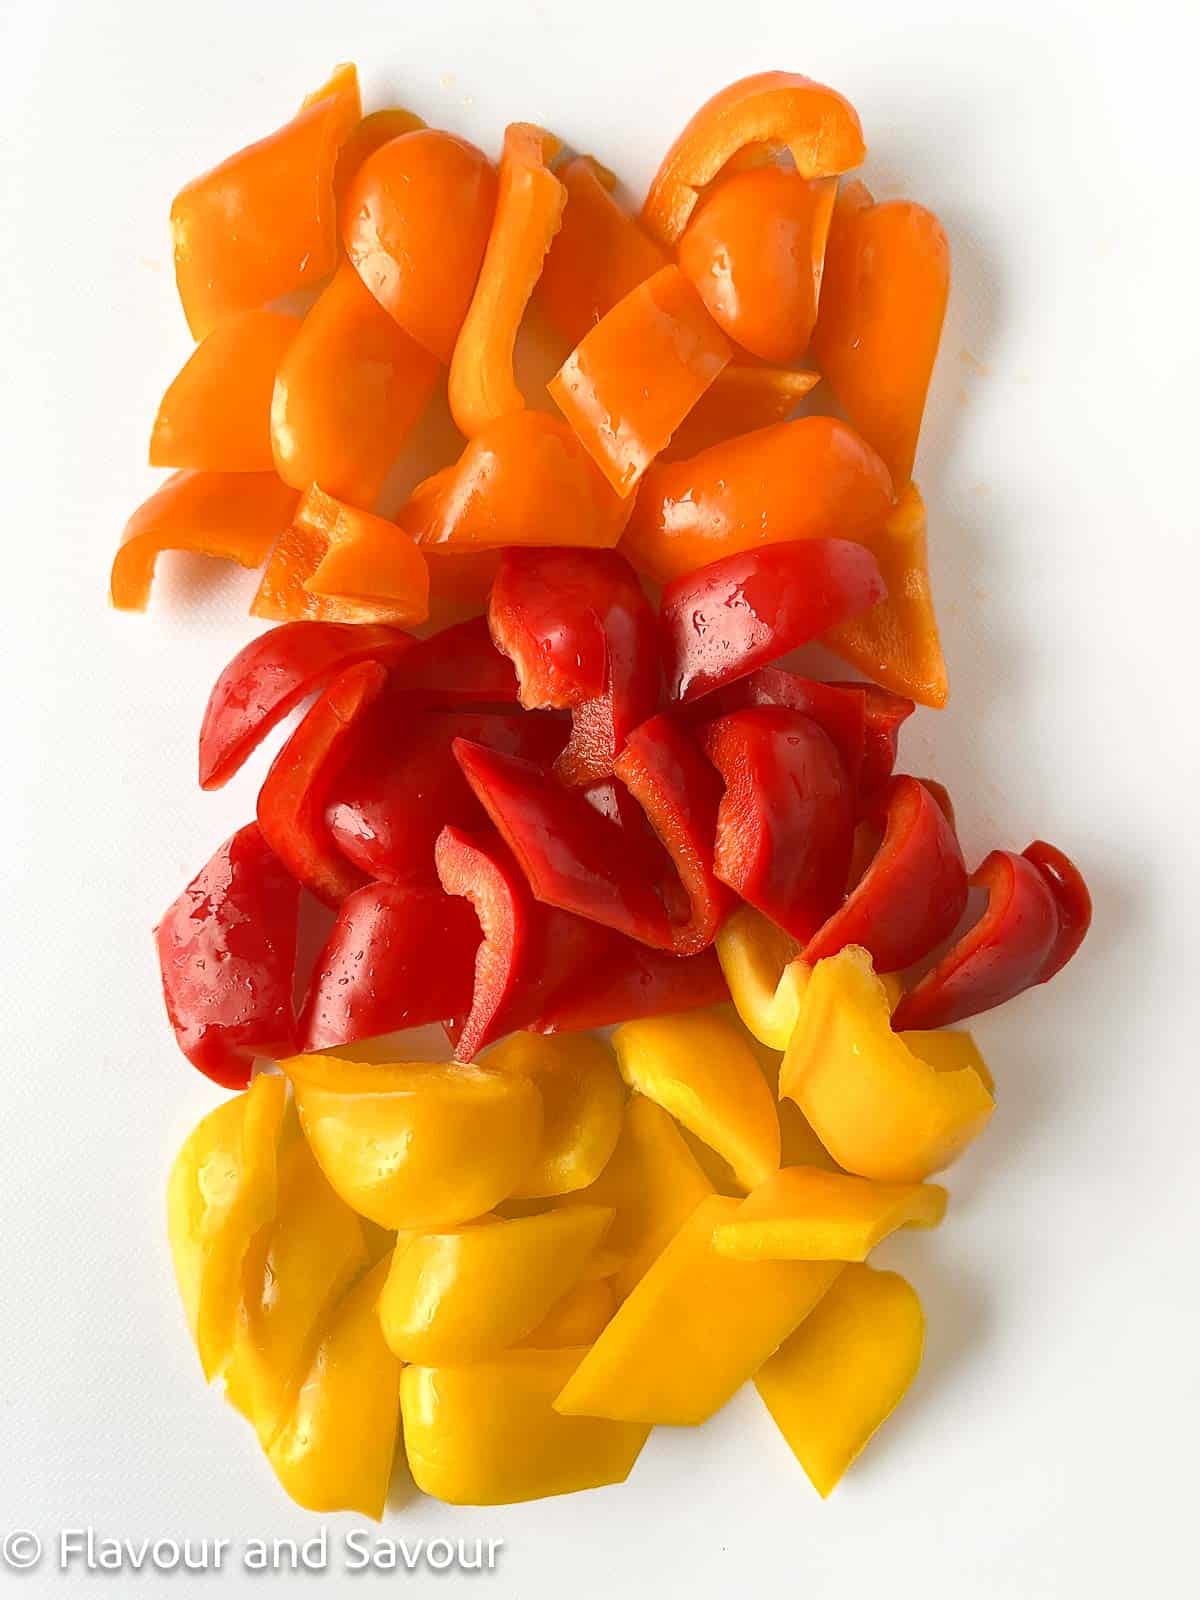 Orange, red and yellow bell peppers on a cutting board, cut into bite-sized pieces.